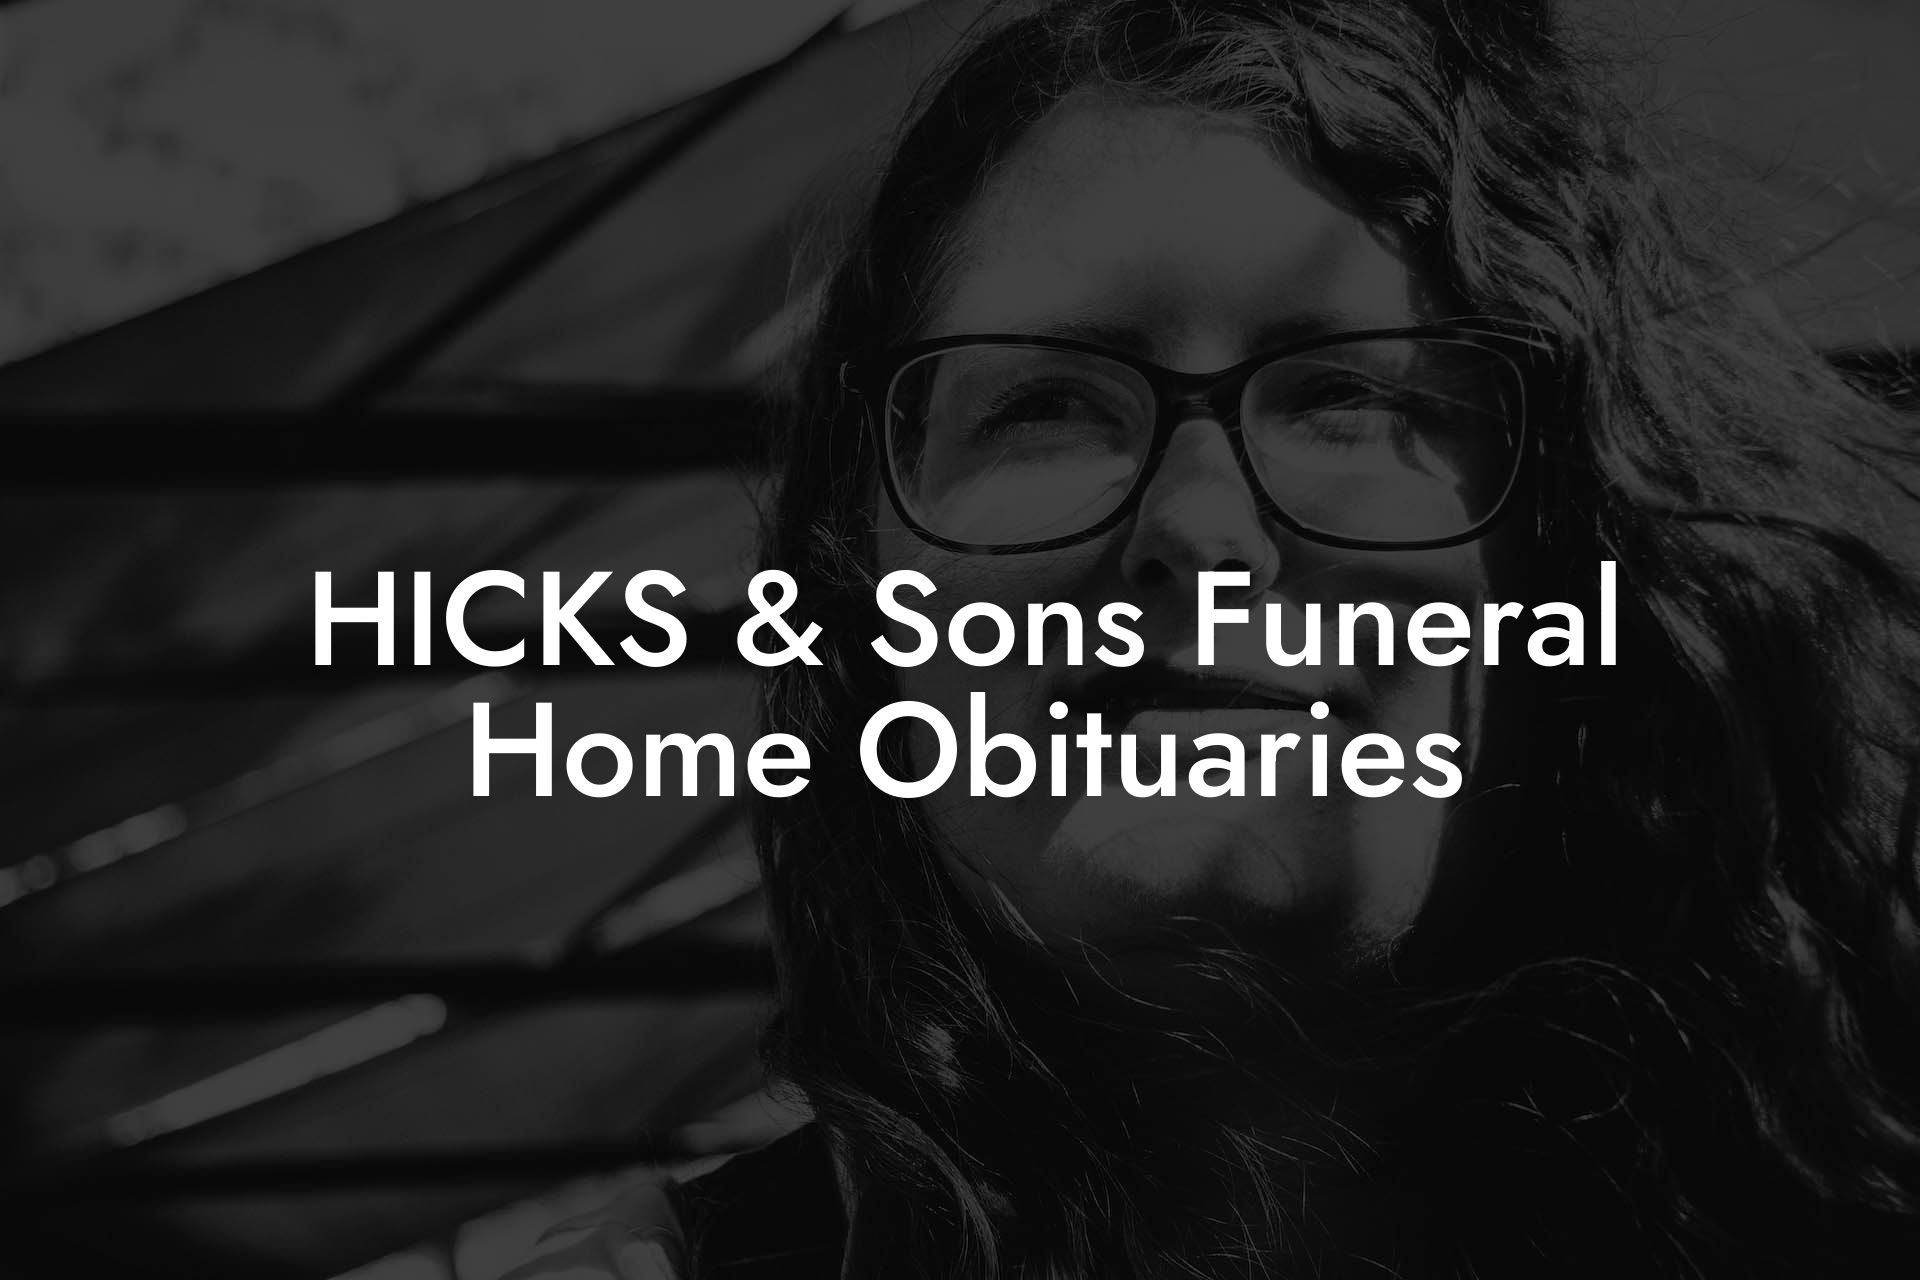 HICKS & Sons Funeral Home Obituaries